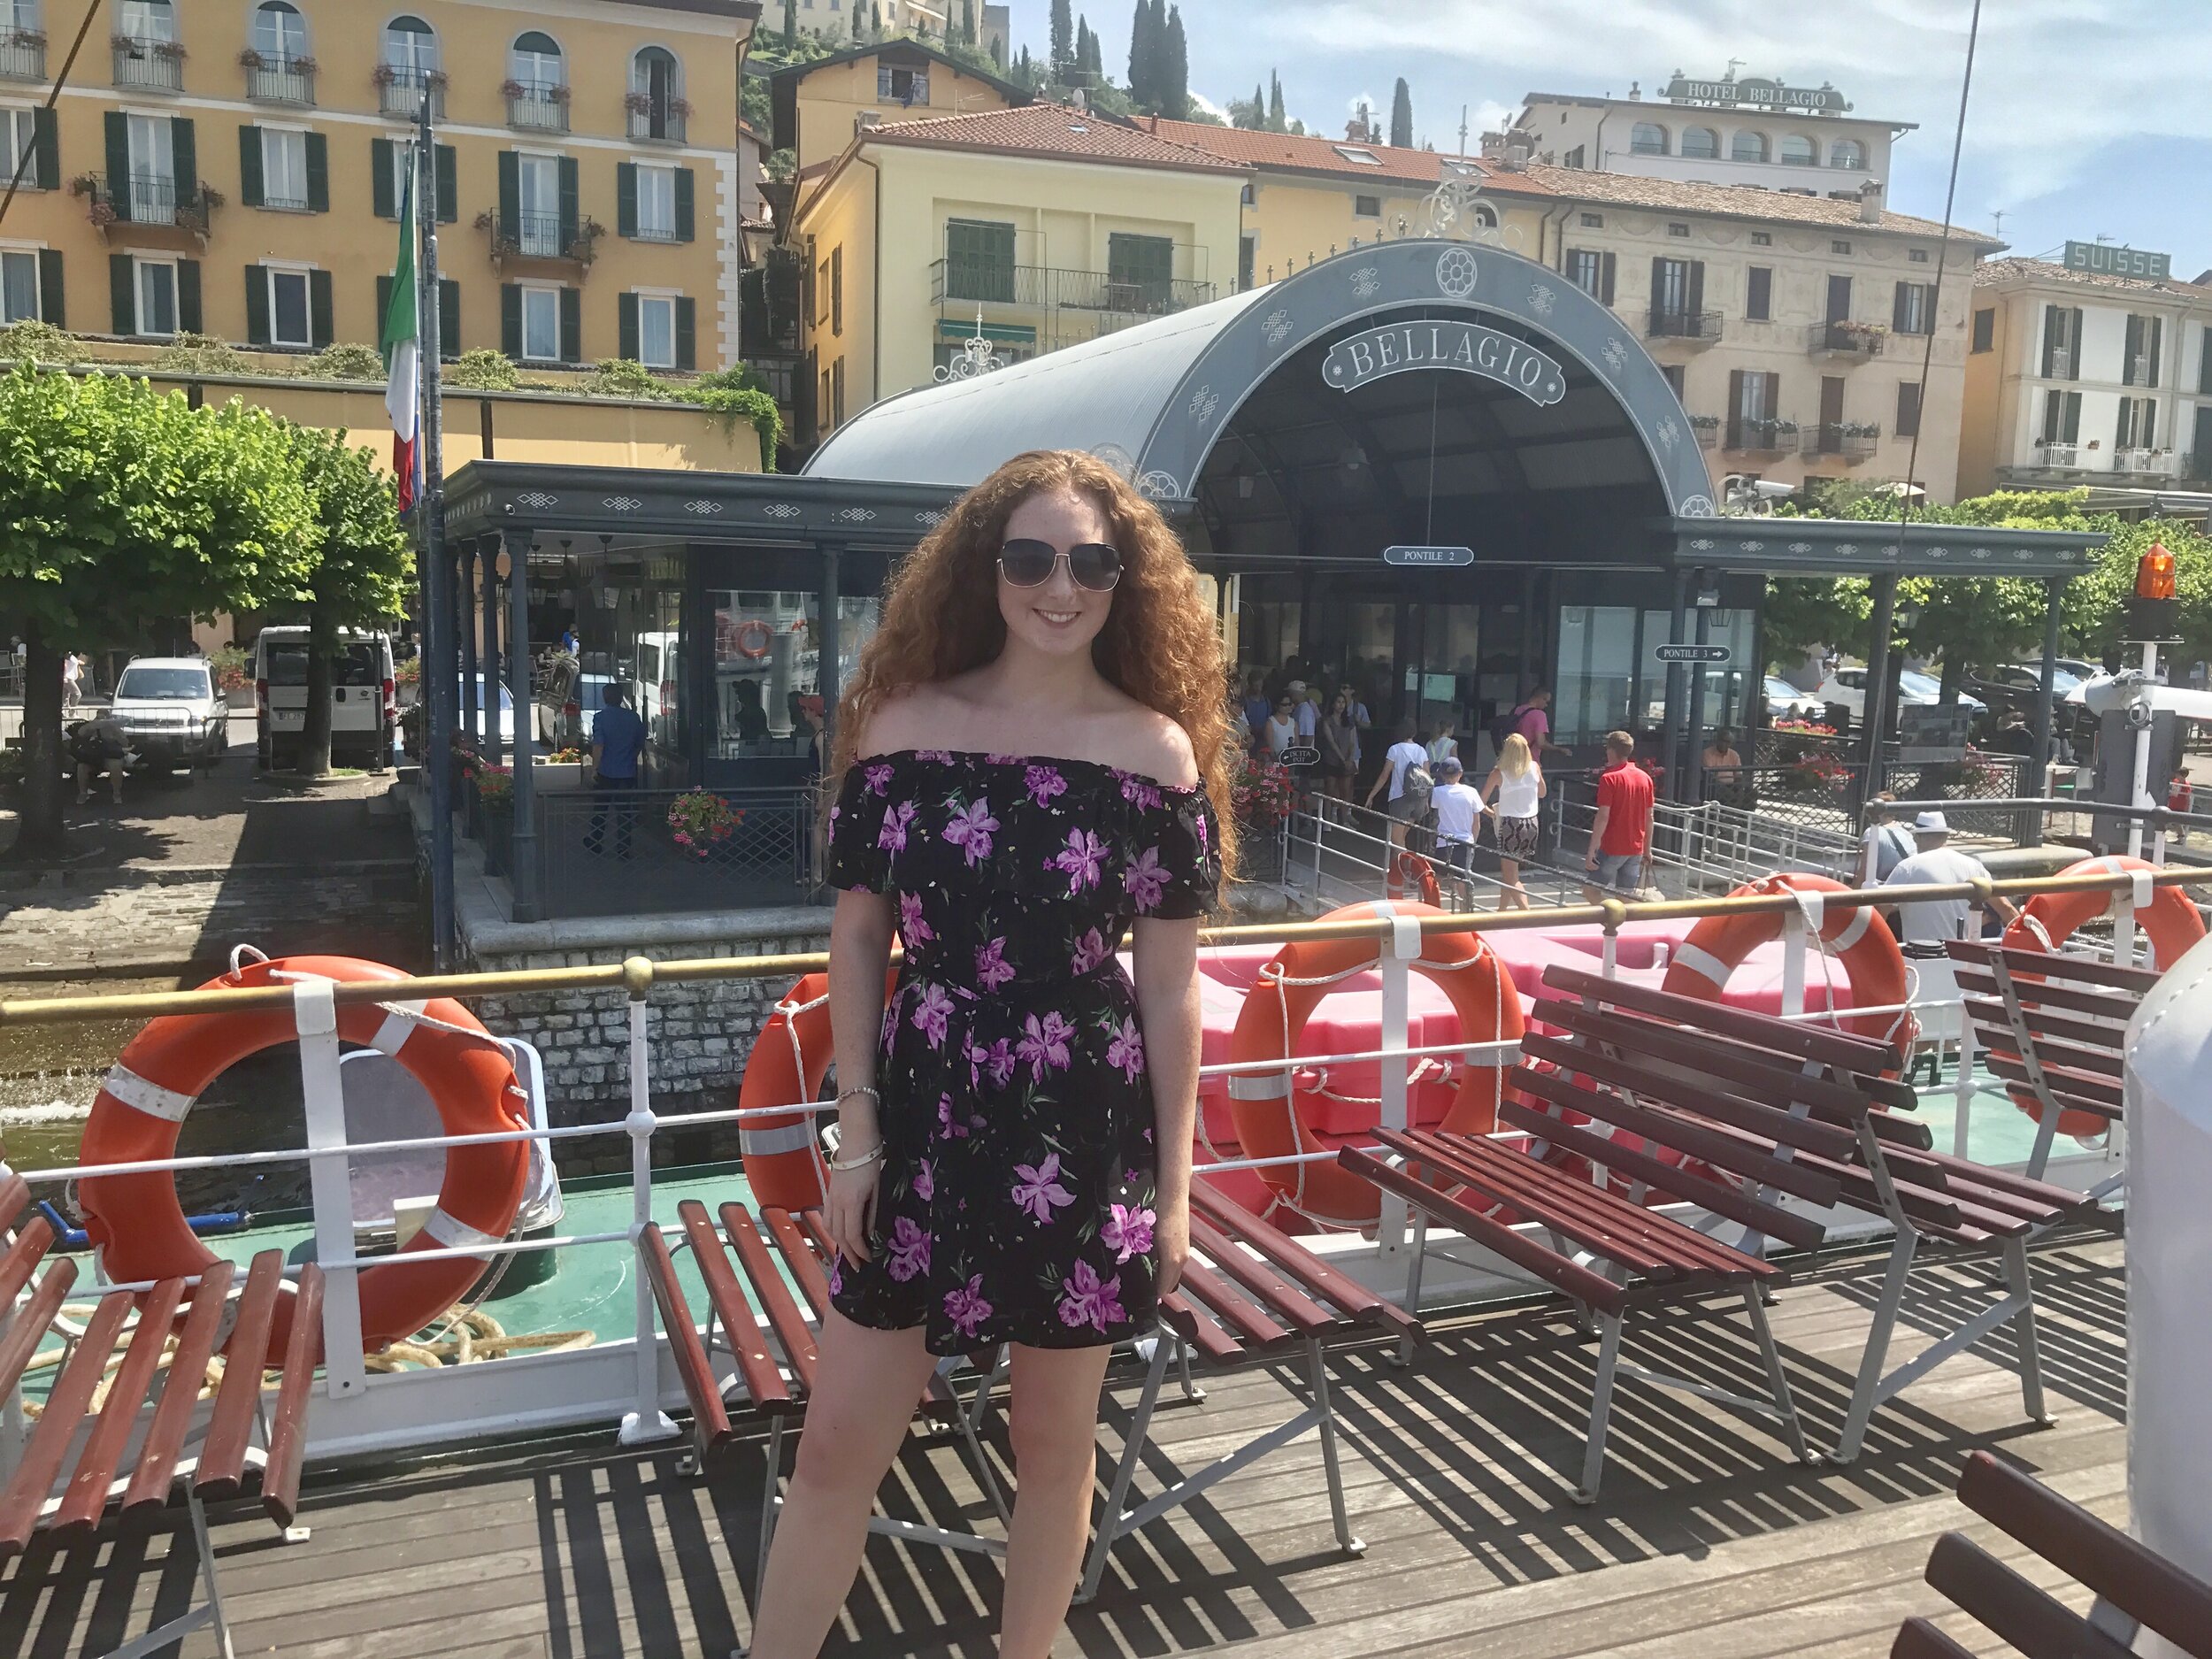 Lake Como Travel Guide: Arriving in Bellagio after taking the ferry from Como